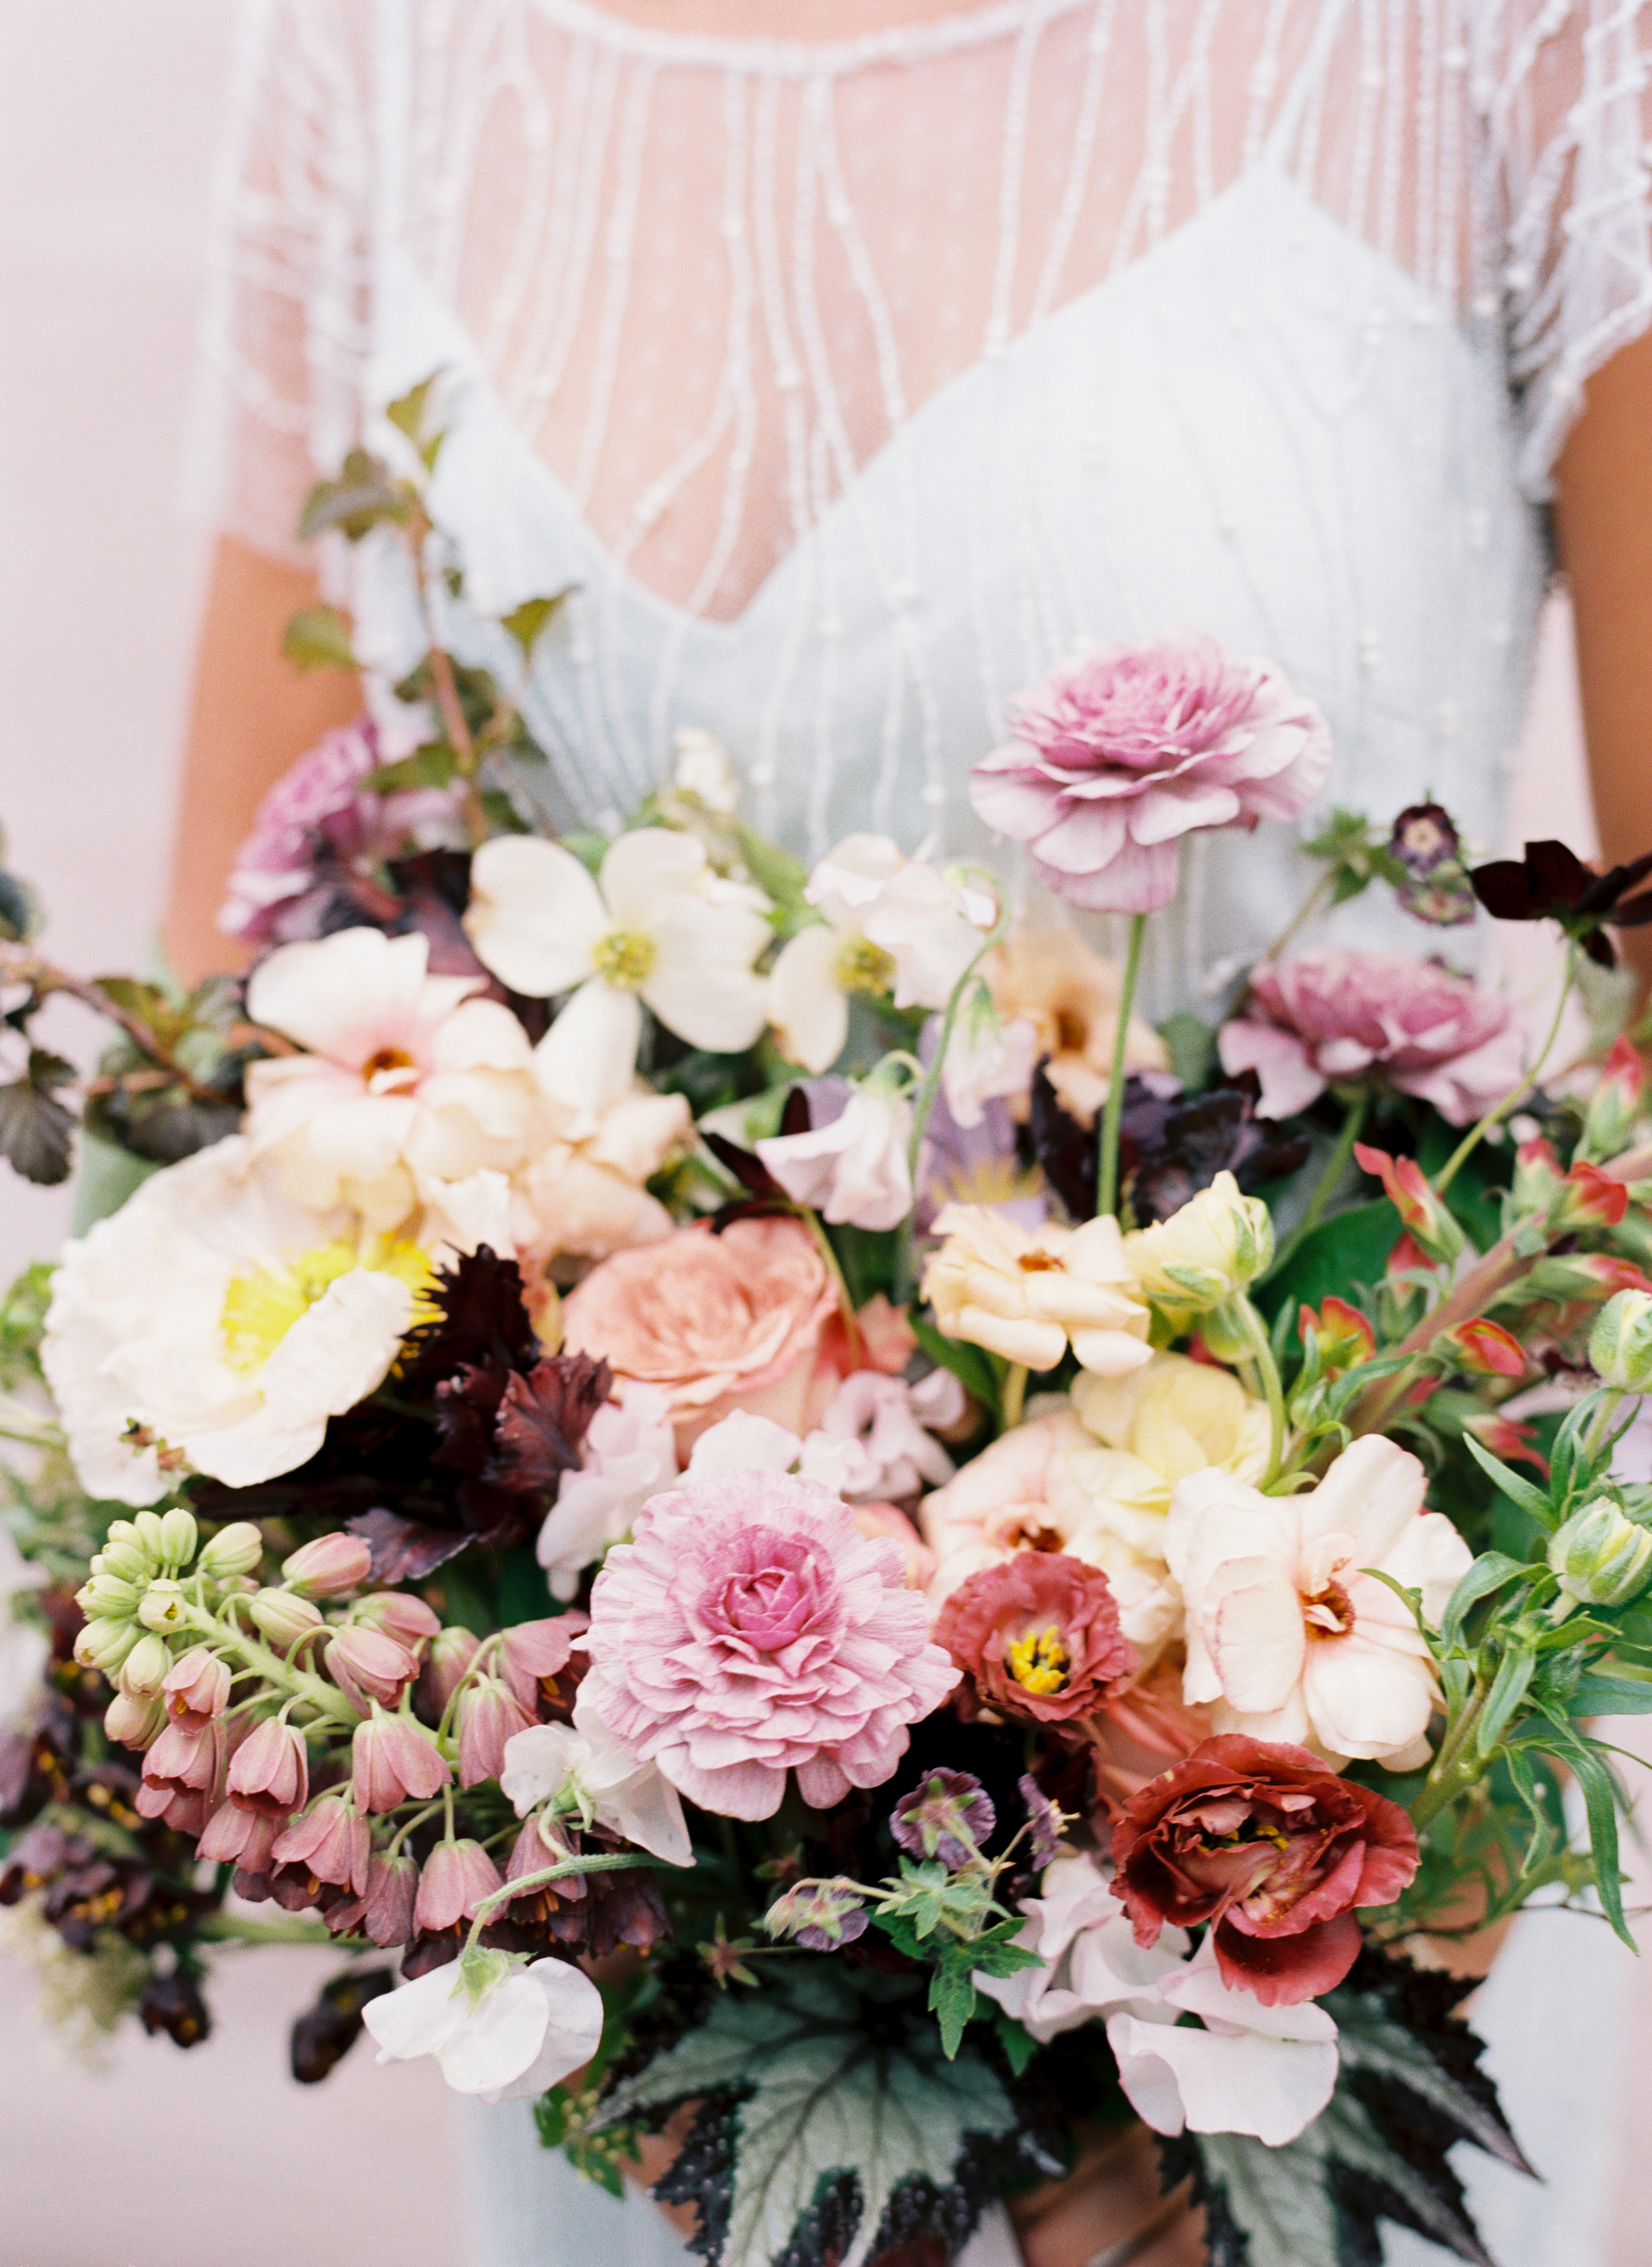 Spring bridal bouquet composed of mauve ranunculus, butterfly ranunculus, fritillaria, Icelandic poppies, sweet peas, and organic greenery. Nashville Wedding Floral Design.